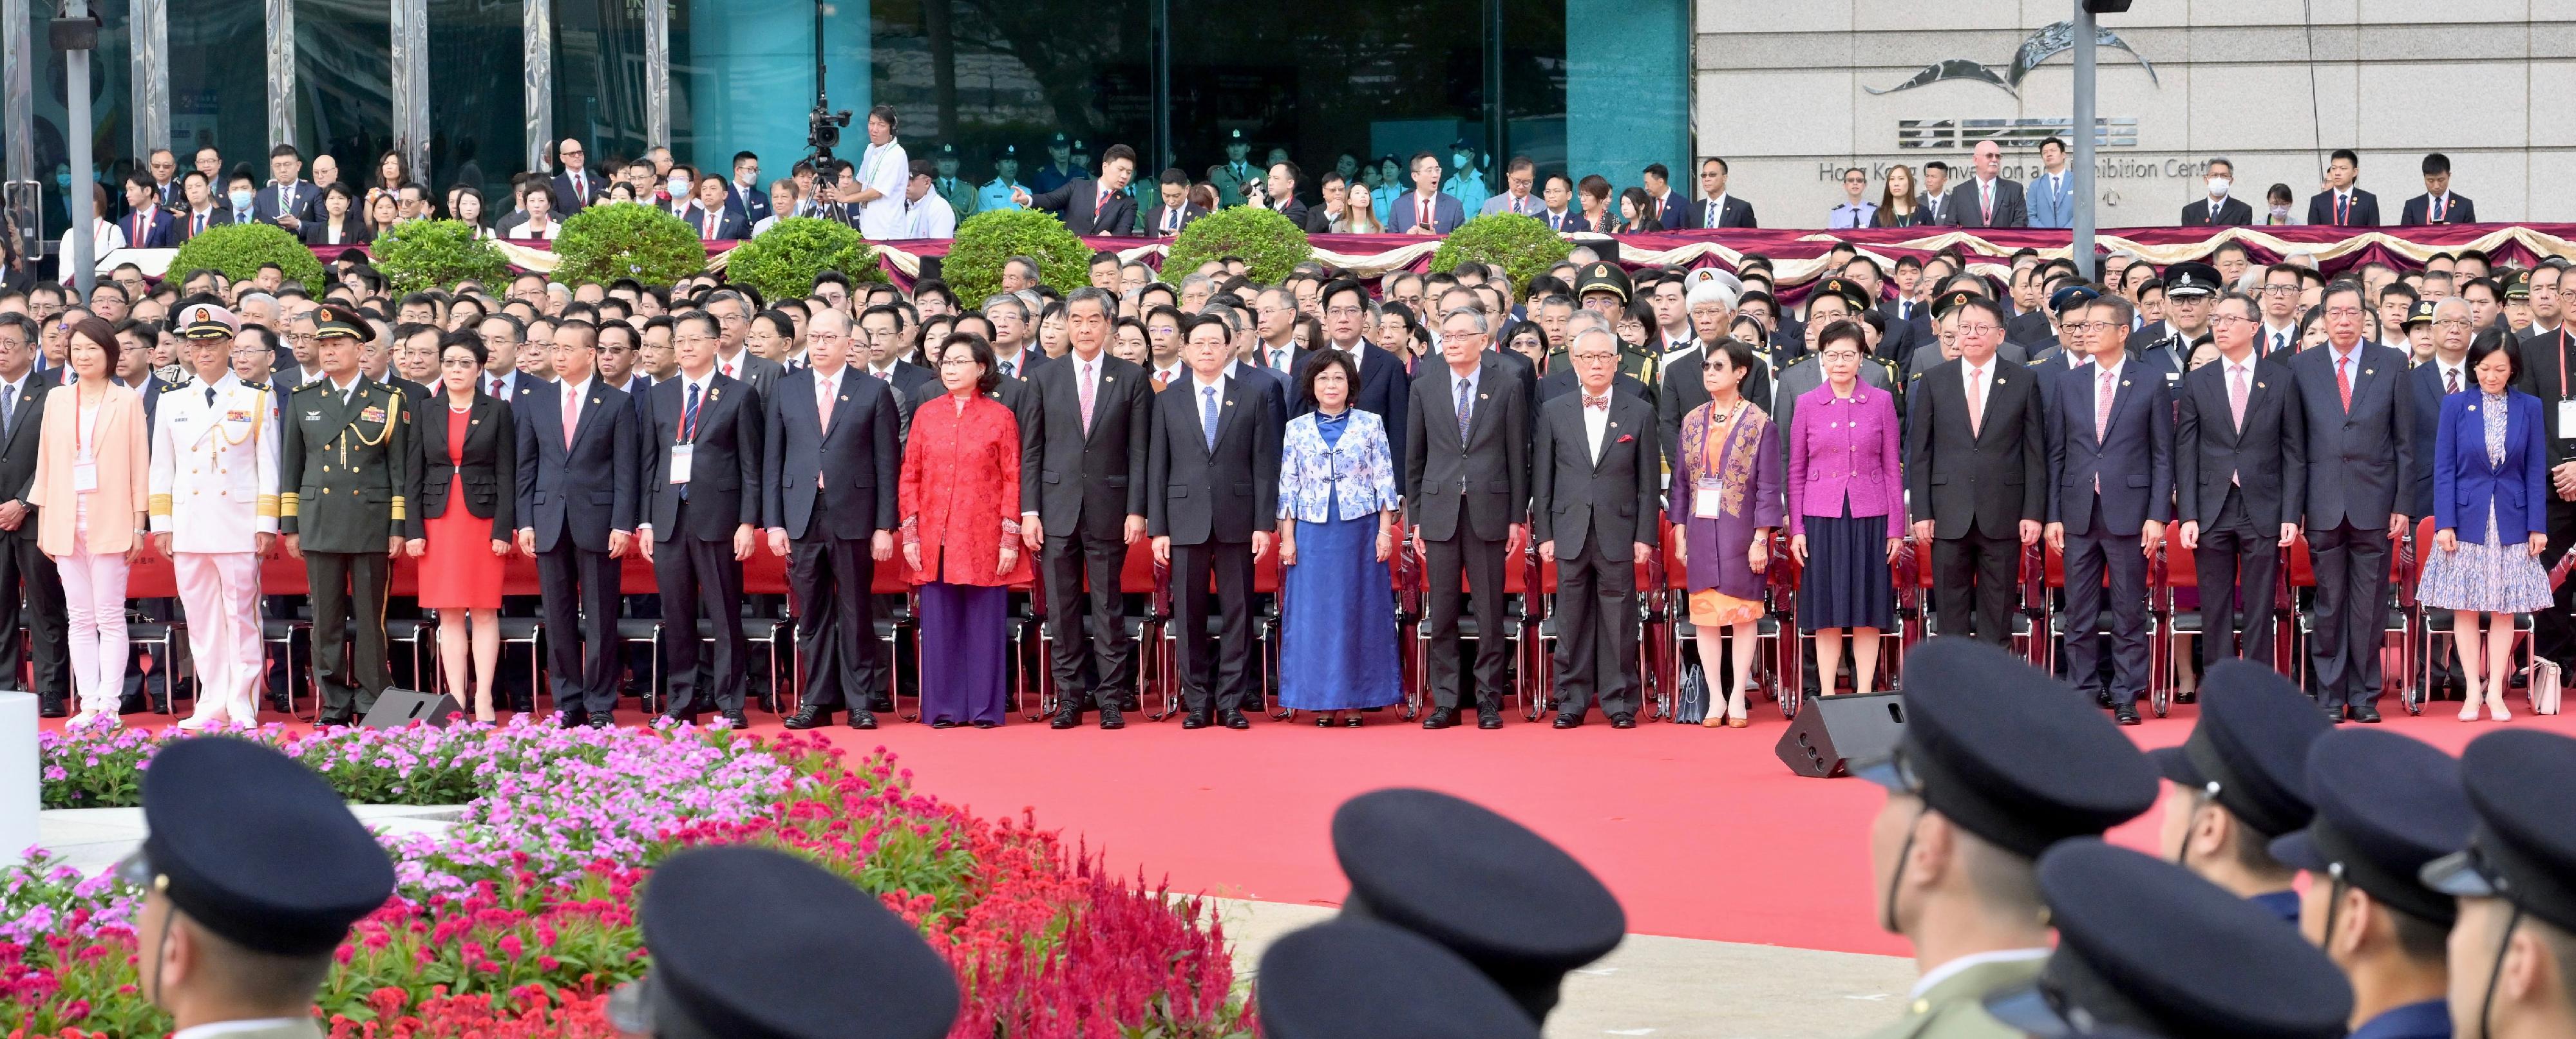 The Chief Executive, Mr John Lee (front row, 10th left), and his wife (front row, 10th right); the Chief Justice of the Court of Final Appeal, Mr Andrew Cheung Kui-nung (front row, 9th right); former CE Mr Donald Tsang (front row, 8th right), and his wife (front row, 7th right); Vice-Chairman of the National Committee of the CPPCC Mr C Y Leung (front row, 9th left), and his wife (front row, 8th right); former CE Mrs Carrie Lam (front row, 6th right); the Director of the LOCPG in the HKSAR, Mr Zheng Yanxiong (front row, 7th left); Deputy Head of the Office for Safeguarding National Security of the CPG in the HKSAR Mr Li Jiangzhou (front row, 6th left); the Commissioner of the Ministry of Foreign Affairs in the HKSAR, Mr Liu Guangyuan (front row, 5th left), and his wife (front row, 4th left); the Commander-in-chief of the CPLA Hong Kong Garrison, Major General Peng Jingtang (front row, 3rd left); the Political Commissar of the CPLA Hong Kong Garrison, Navy Rear Admiral Lai Ruxin (front row, 2nd left); the Chief Secretary for Administration, Mr Chan Kwok-ki (front row, 5th right); the Financial Secretary, Mr Paul Chan (front row, 4th right); the Secretary for Justice, Mr Paul Lam, SC (front row, 3rd right); the President of the LC, Mr Andrew Leung (front row, 2nd right); the Convenor of the Non-official Members of the ExCo, Mrs Regina Ip (front row, 1st right), together with Principal Officials and guests, attend the flag-raising ceremony for the 26th anniversary of the establishment of the HKSAR at Golden Bauhinia Square in Wan Chai this morning (July 1).